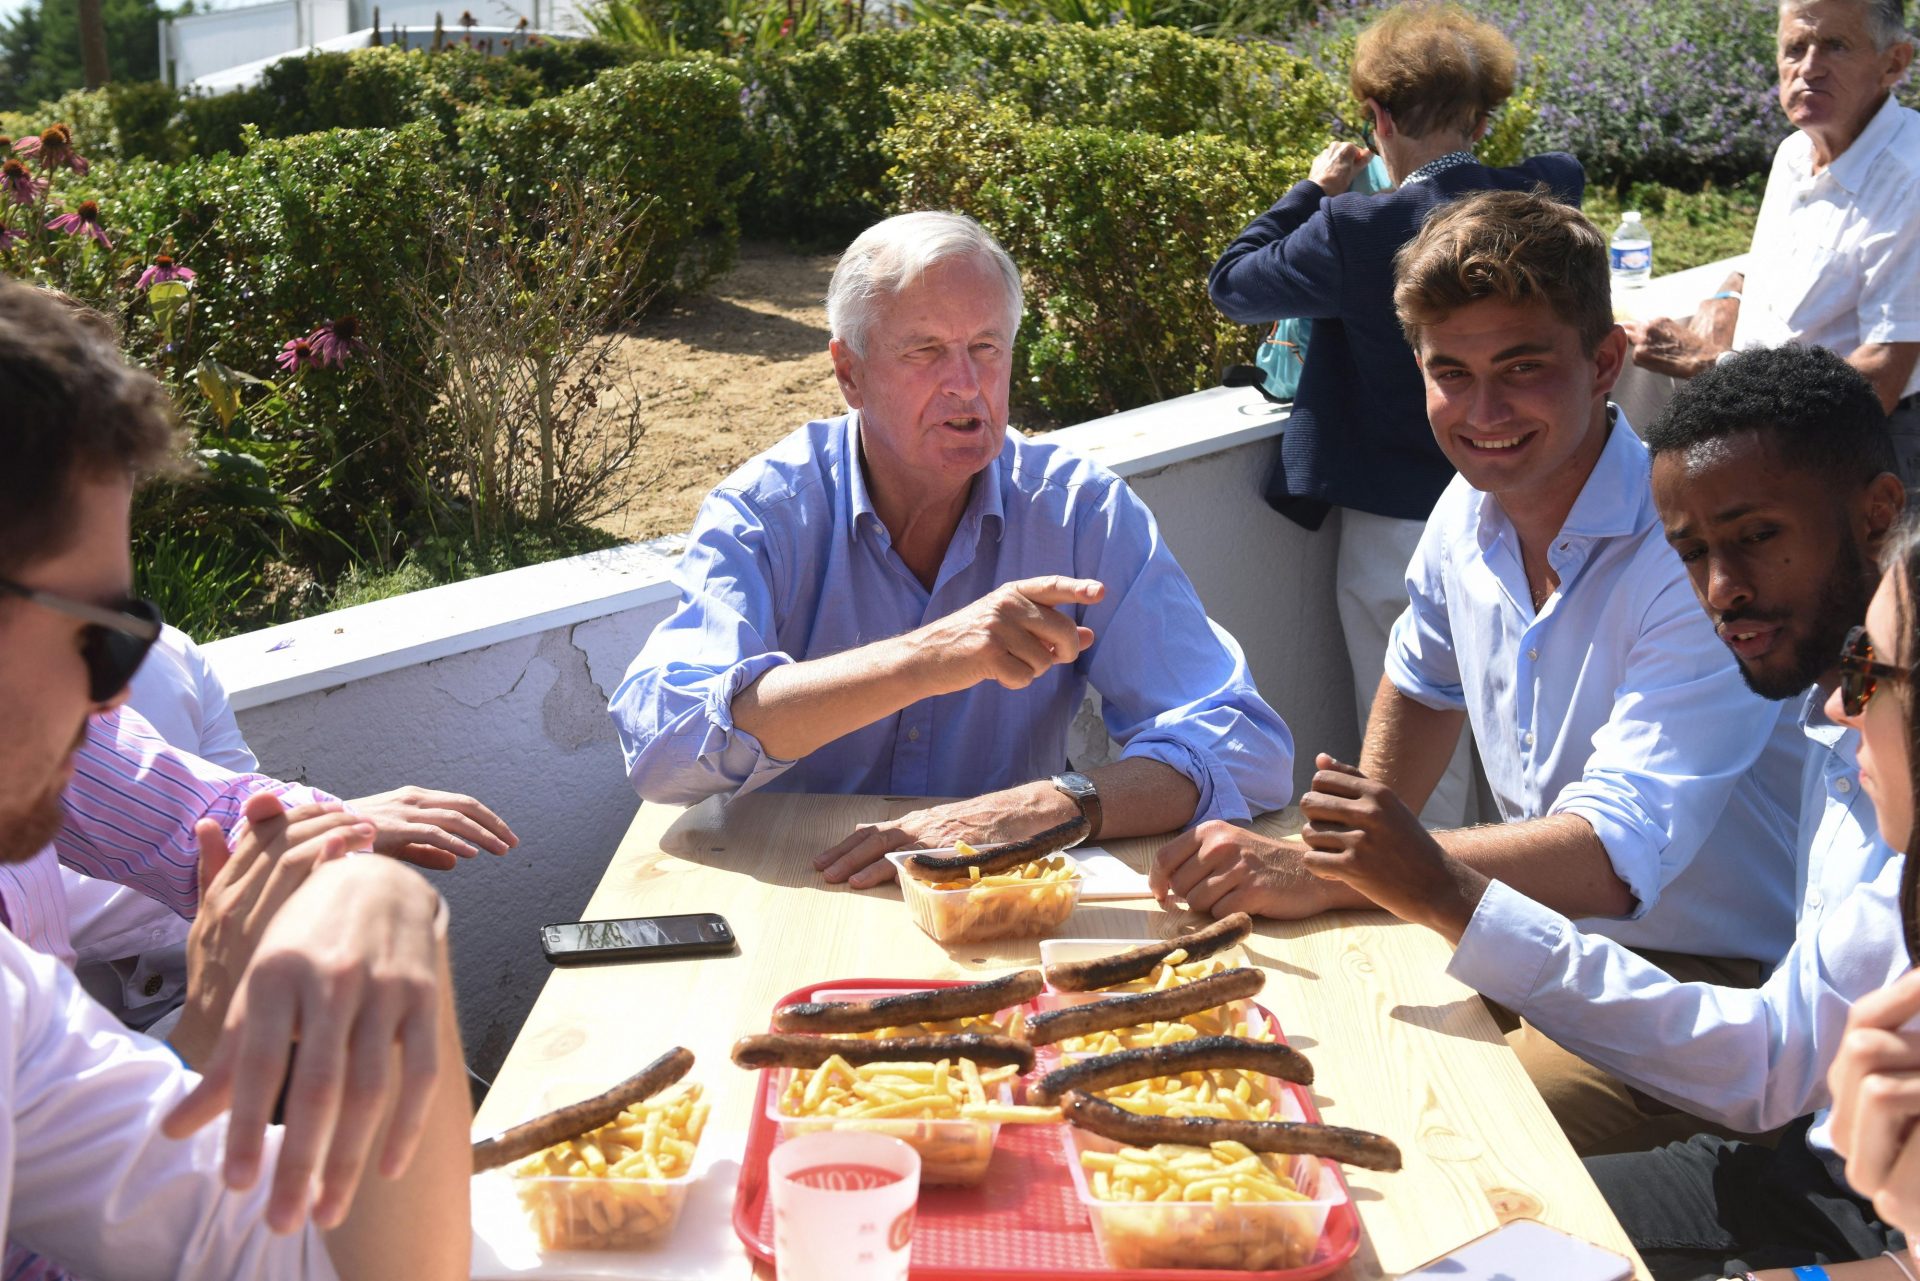 Michel Barnier sits with young delegates during the Les Republicains party's youth summit in La Baule, August 28. Photo: Sebastien Salom-Gomis/AFP via Getty Images